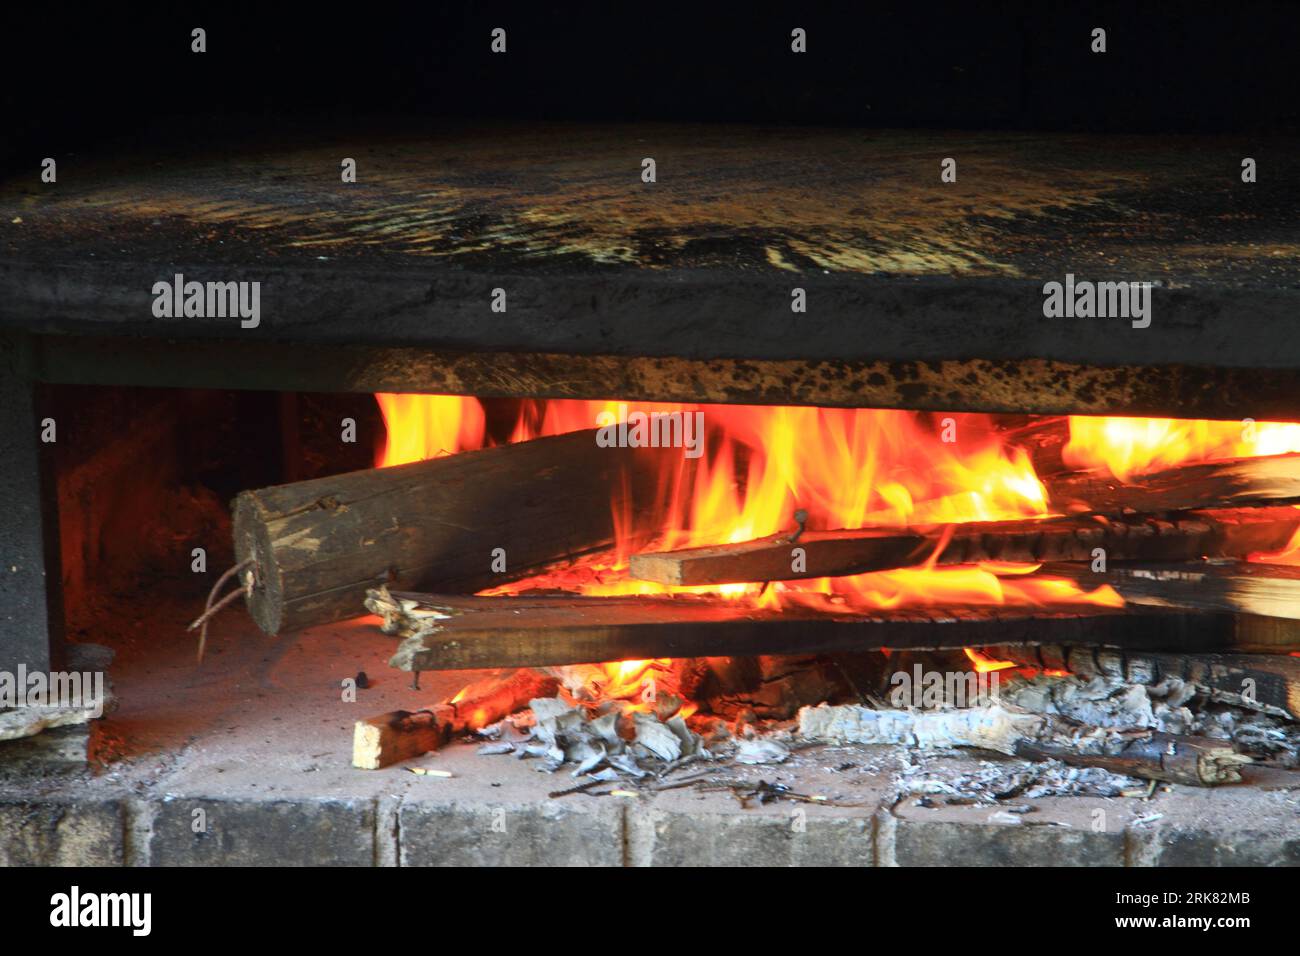 A rustic wood-fired oven resting on a natural stone hearth Stock Photo